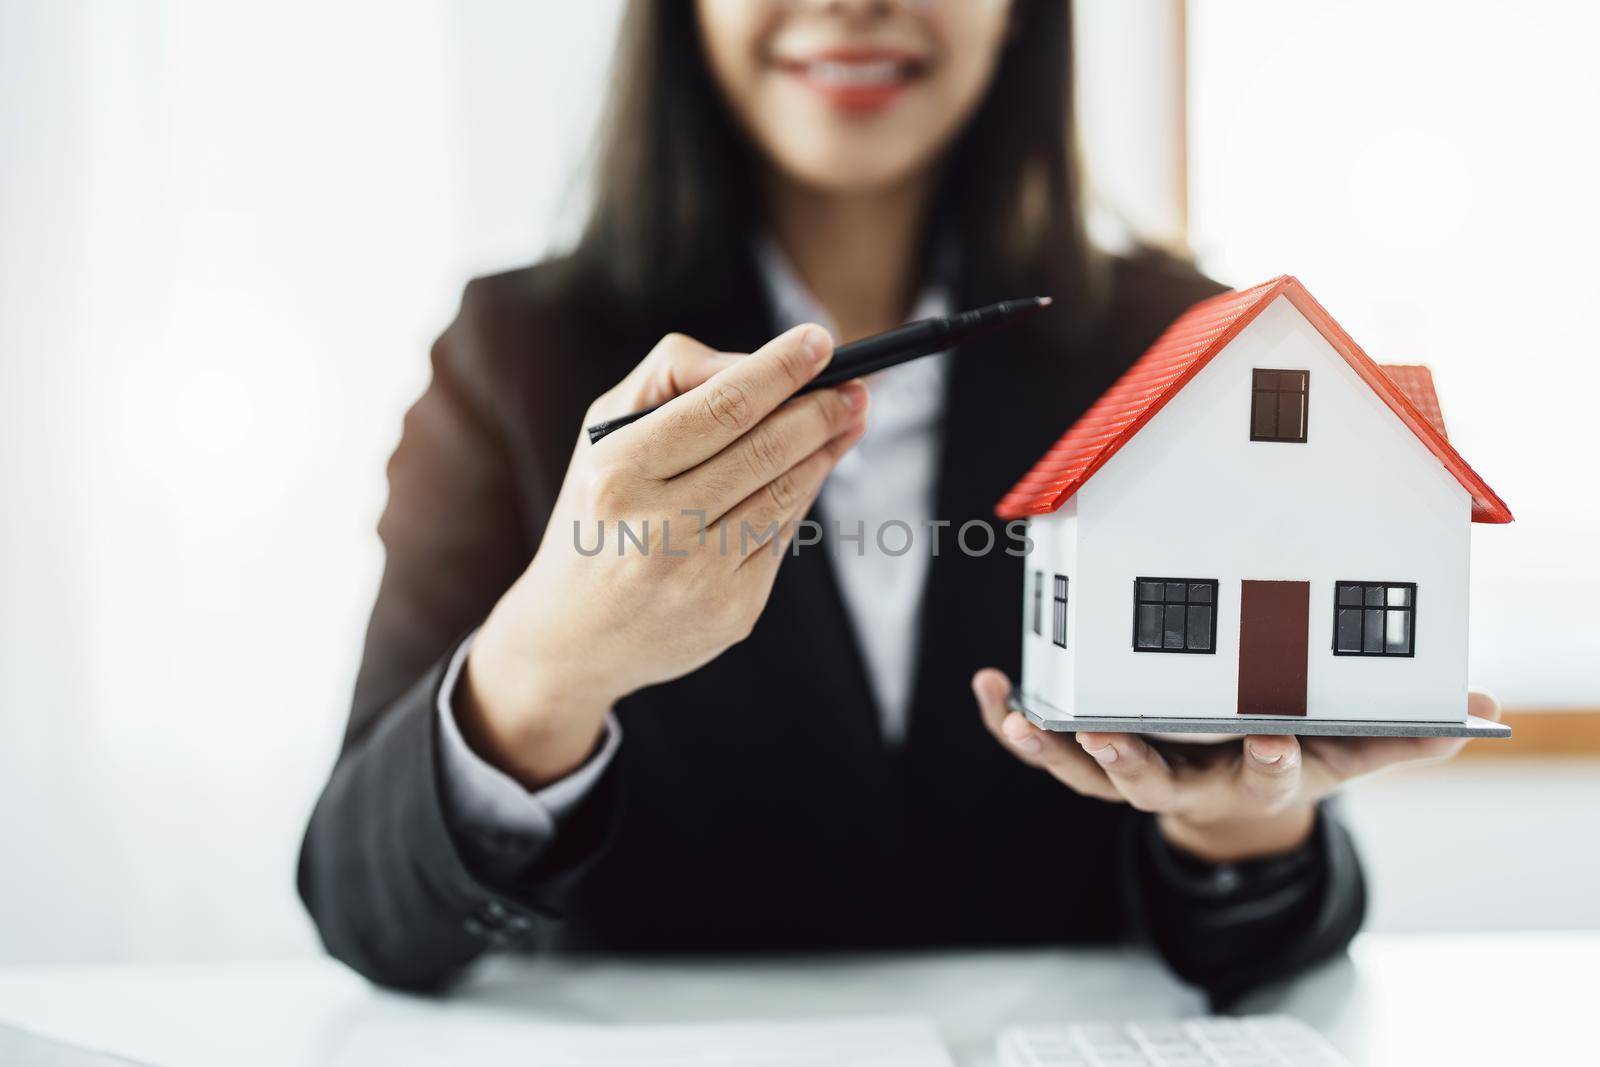 Law, agreement, contract, mortgage, woman holding a pen, pointing at a house to see the interest rate and asking for the limit to assess the risk before buying a house.